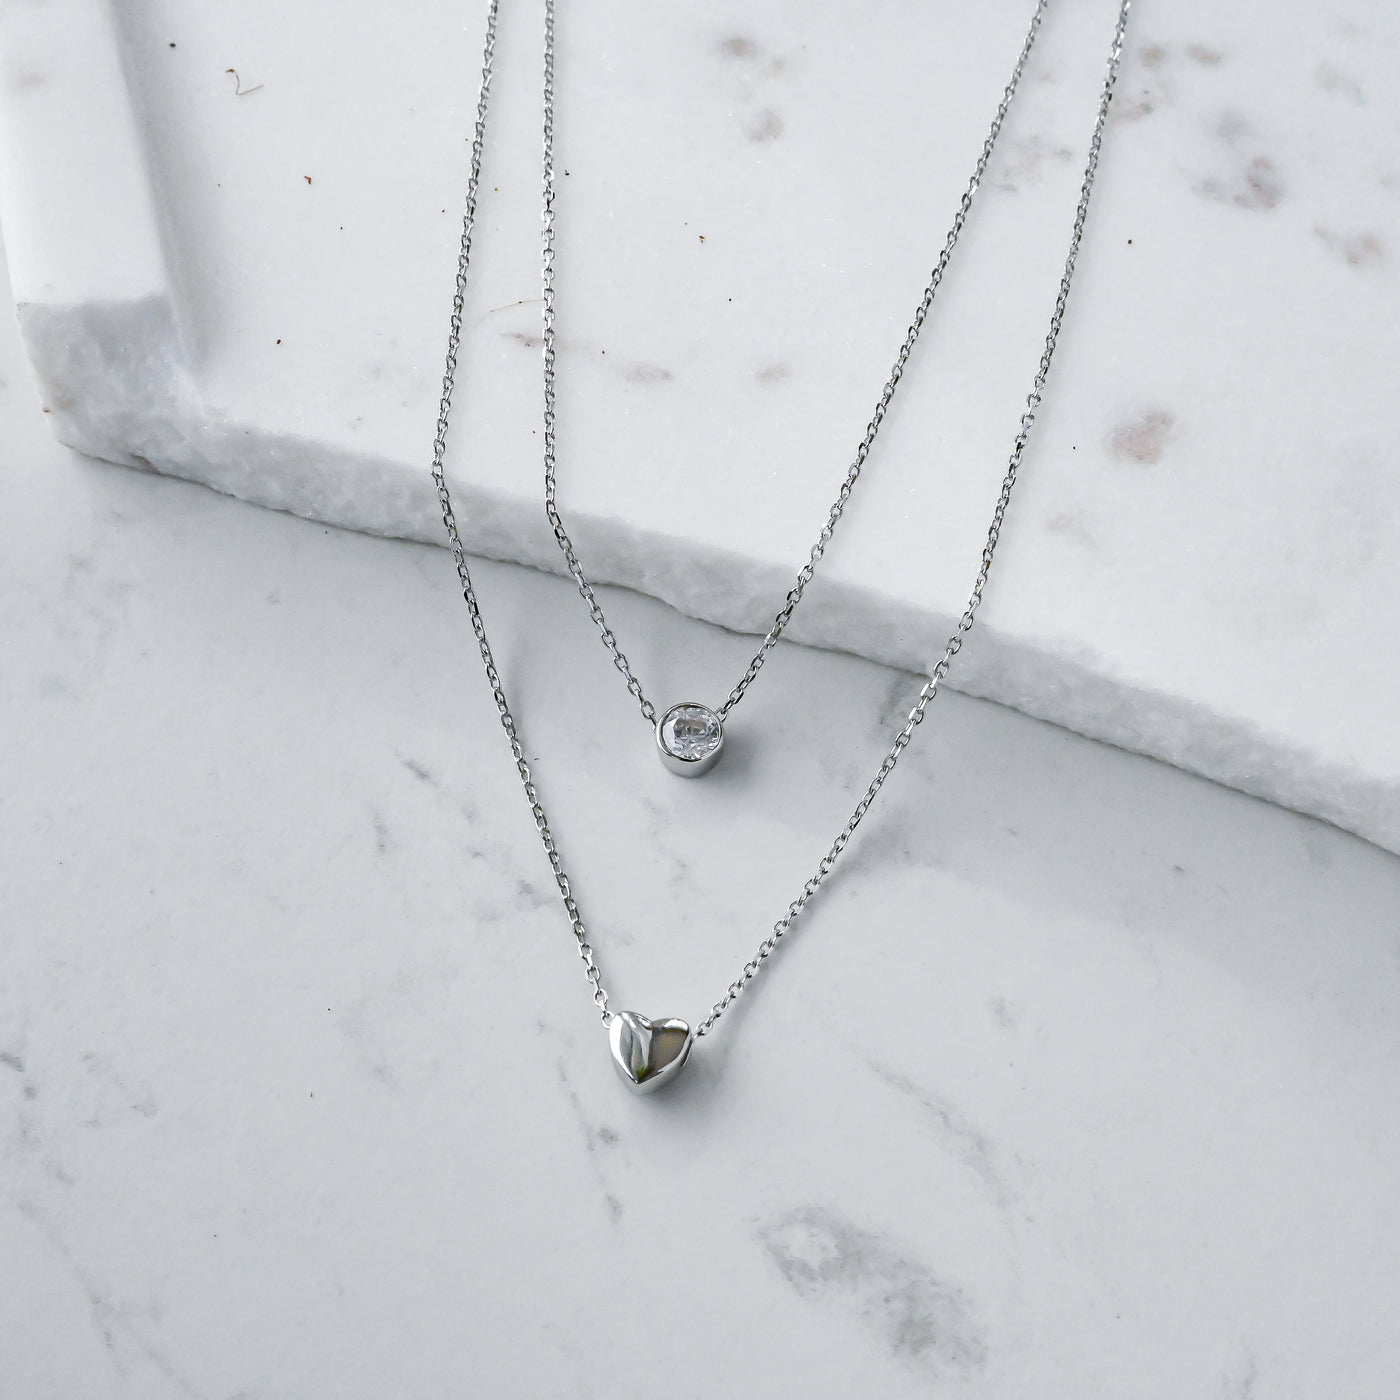 Silver Heart & Crystal Necklace